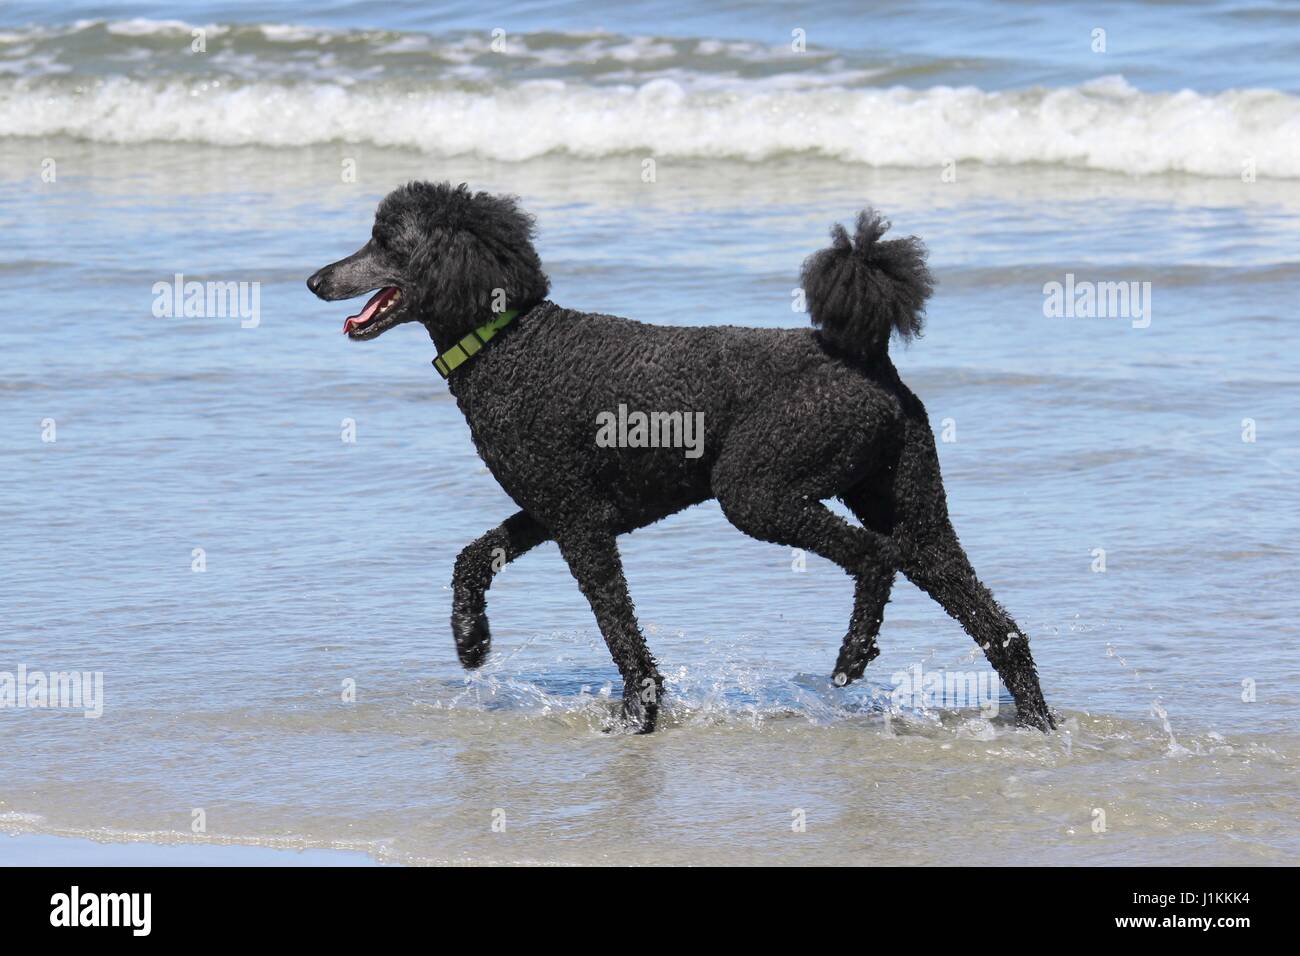 A black standard poodle enjoying a day at the beach Stock Photo